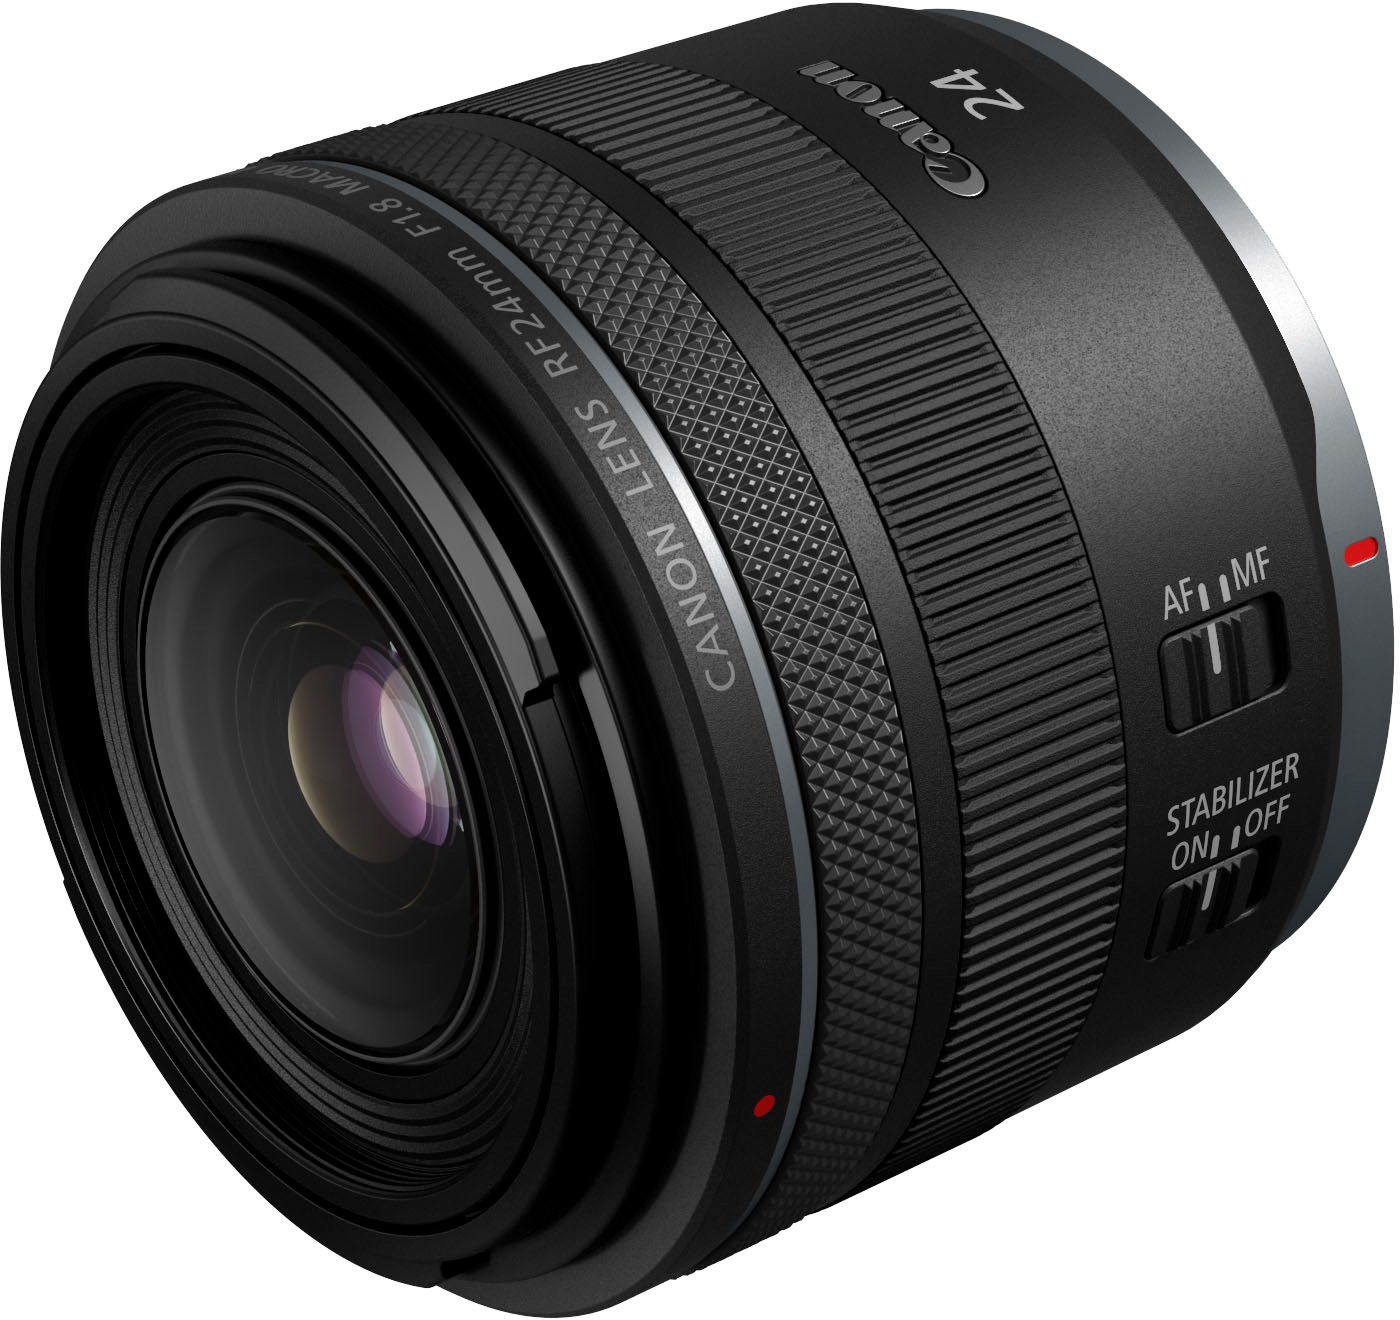 Canon RF 24mm F1.8 MACRO IS STM Wide Angle Prime Lens for EOS R